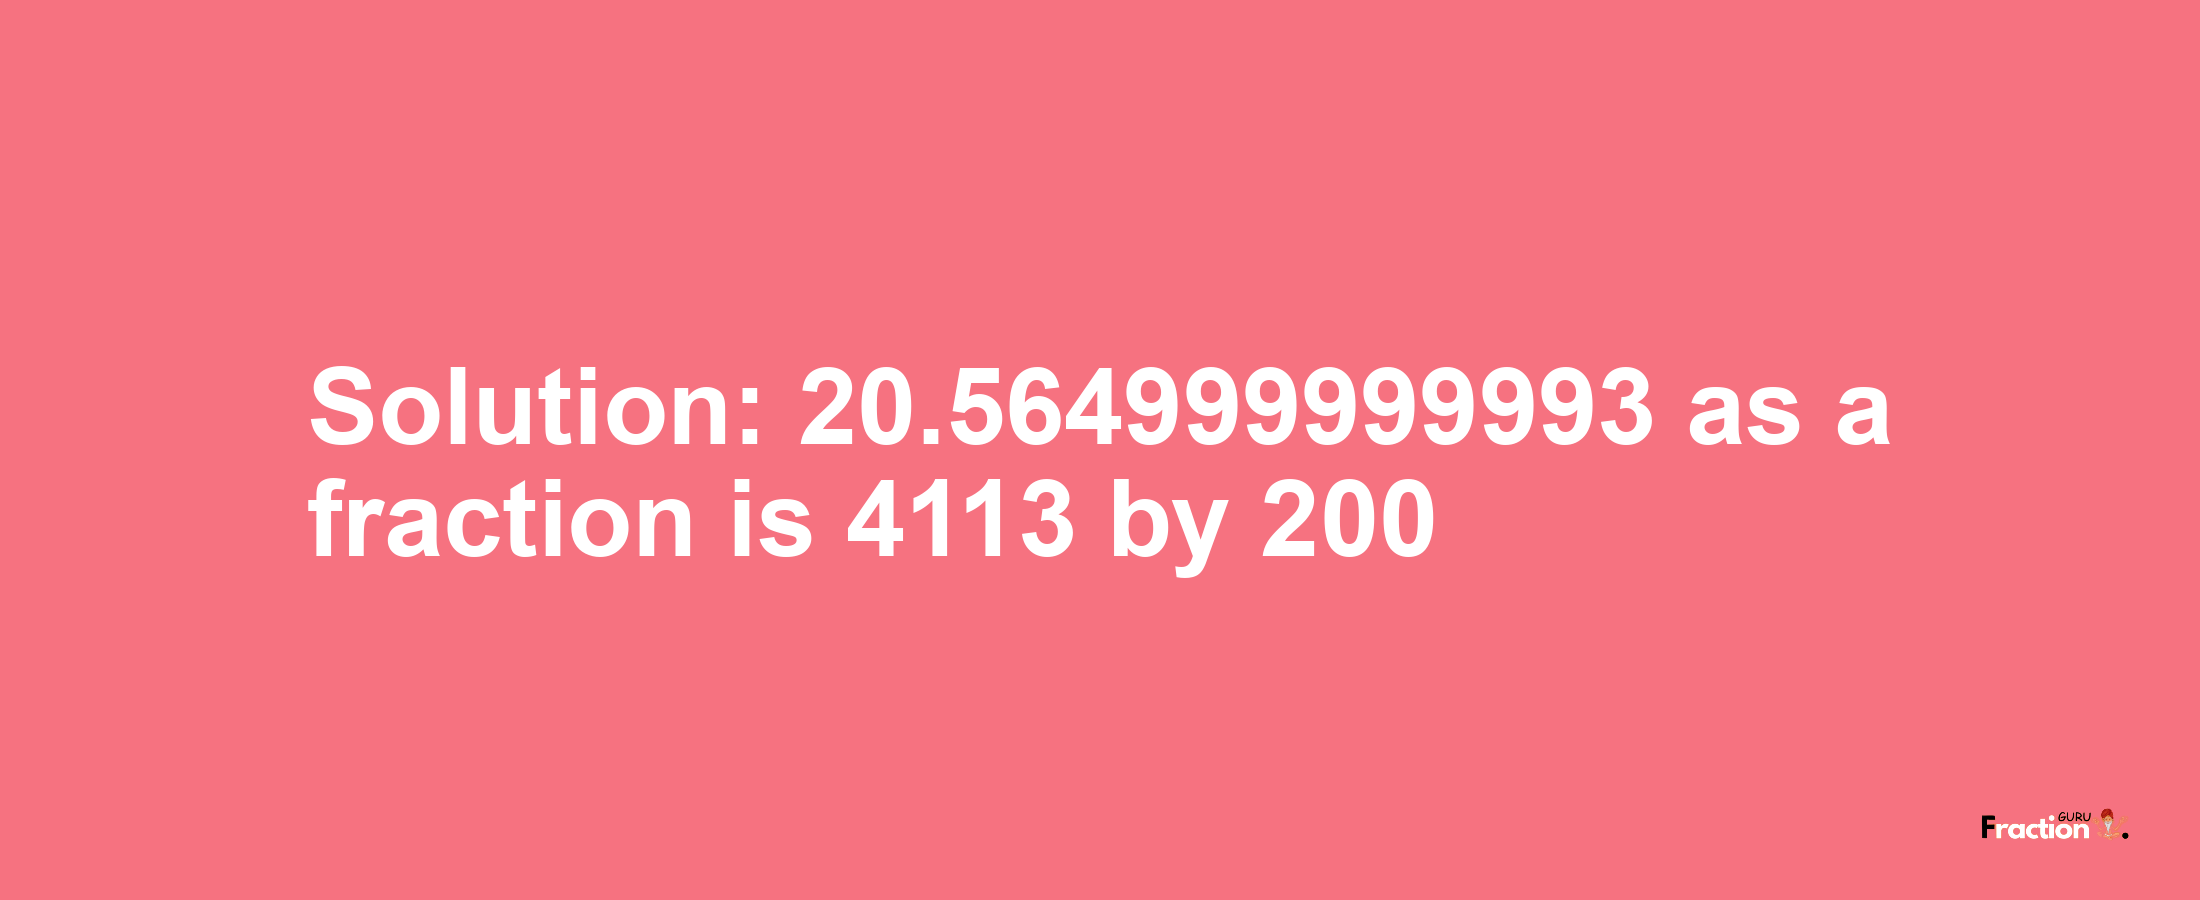 Solution:20.564999999993 as a fraction is 4113/200